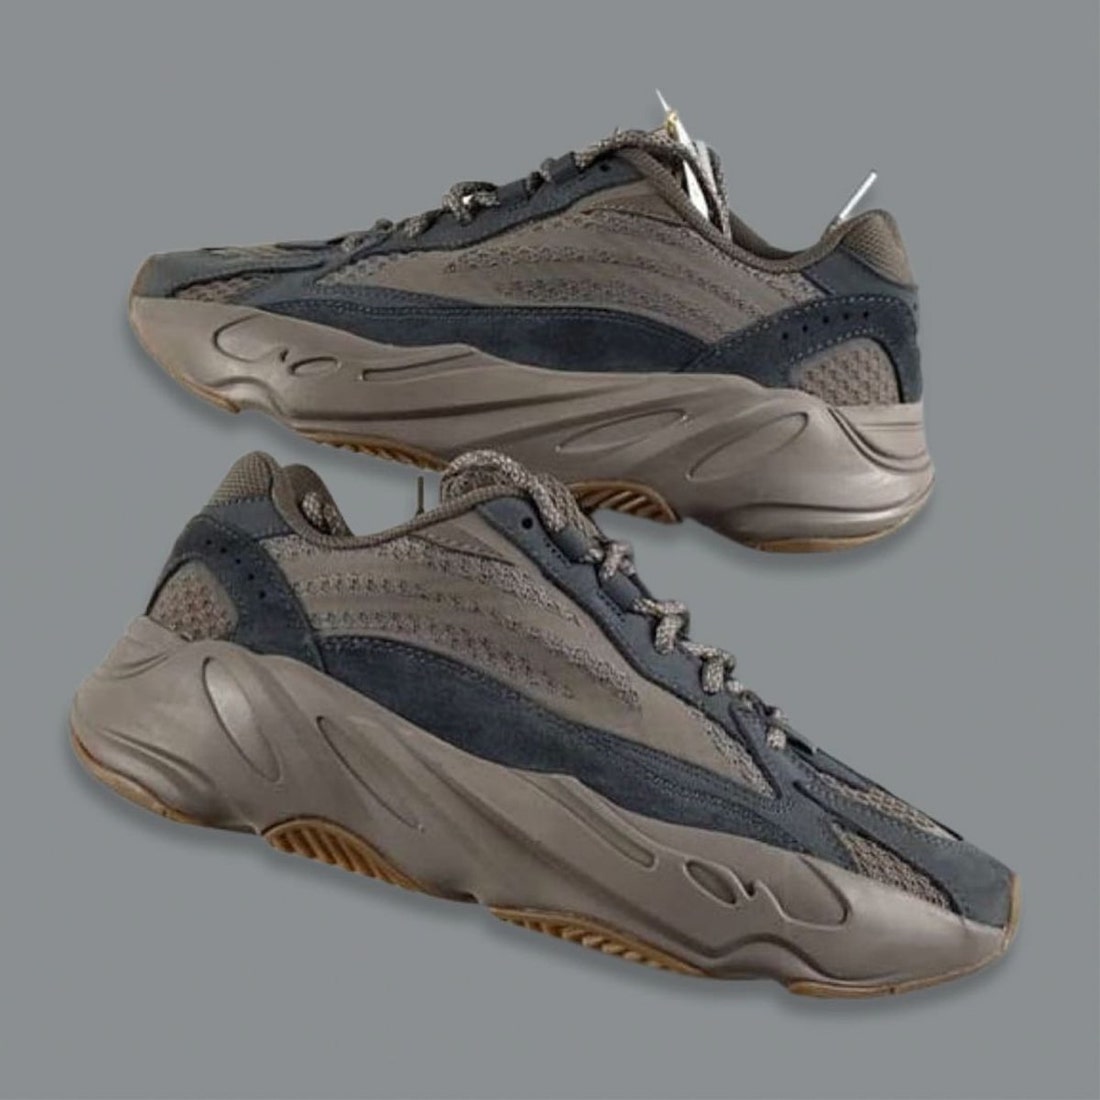 adidas Yeezy Boost 700 V2 Mauve Release Date Price